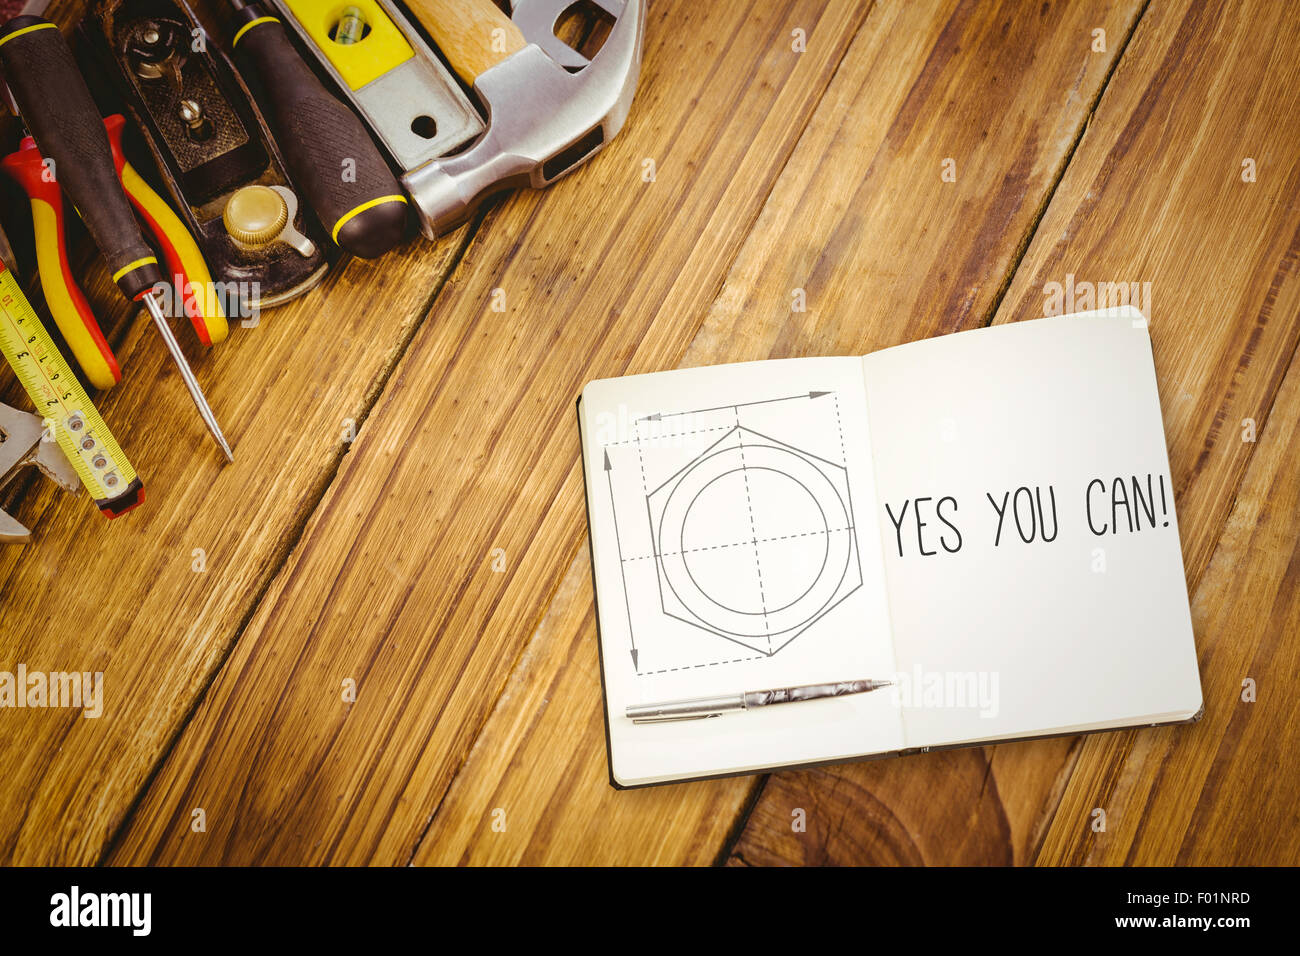 Yes you can! against blueprint Stock Photo